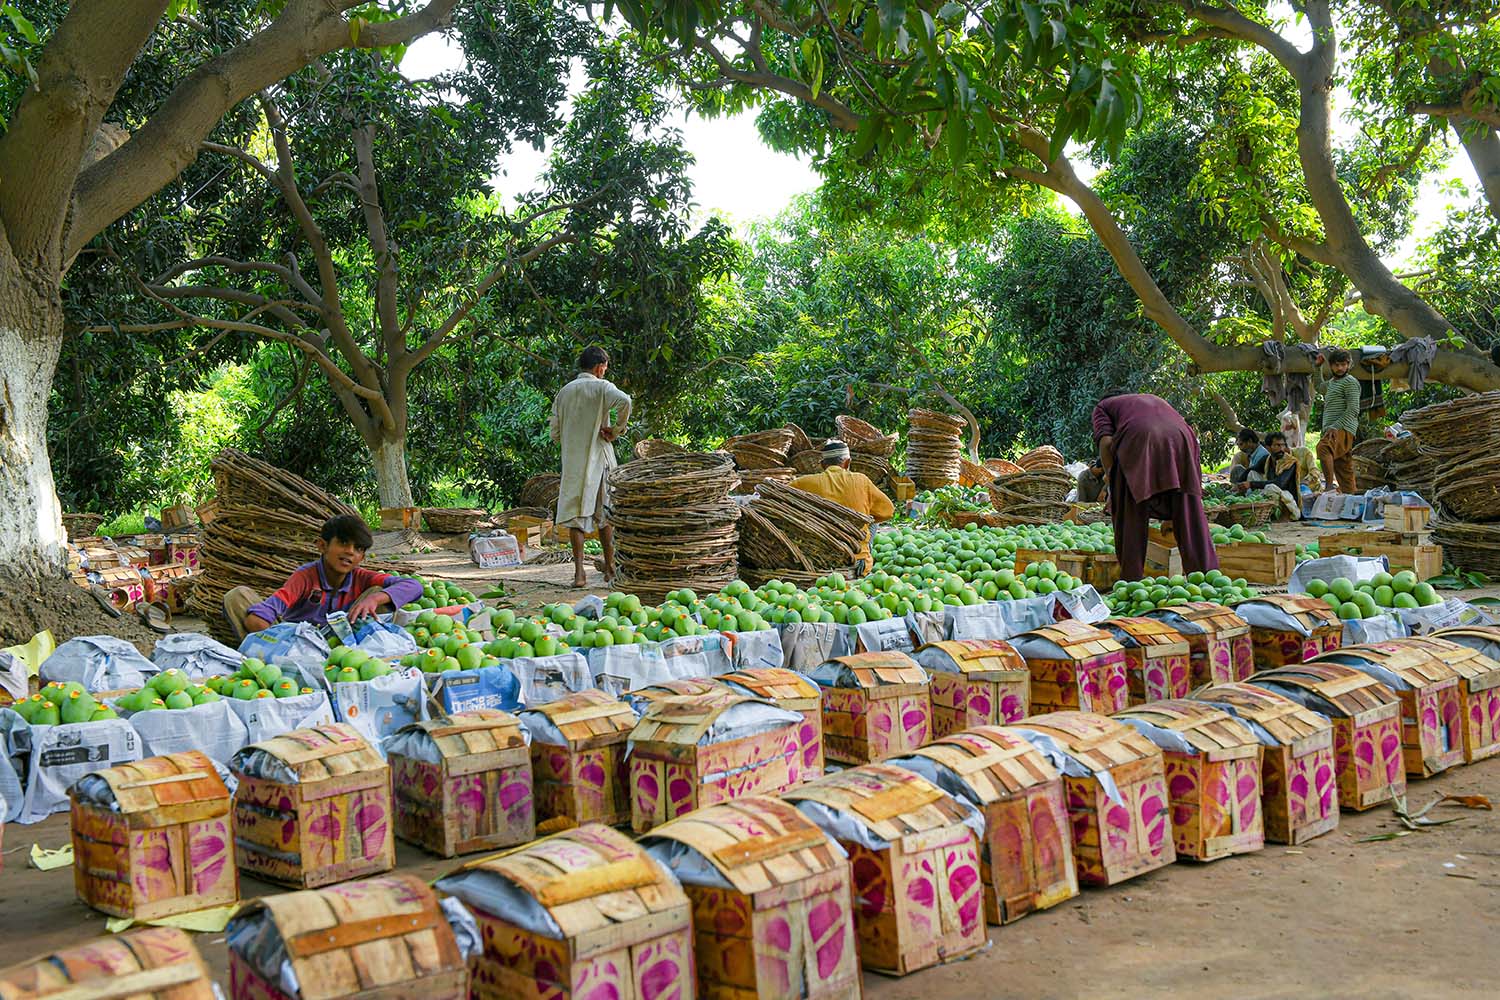 A line of stacked boxes filled with green mangoes, with large trees and men working in the background.